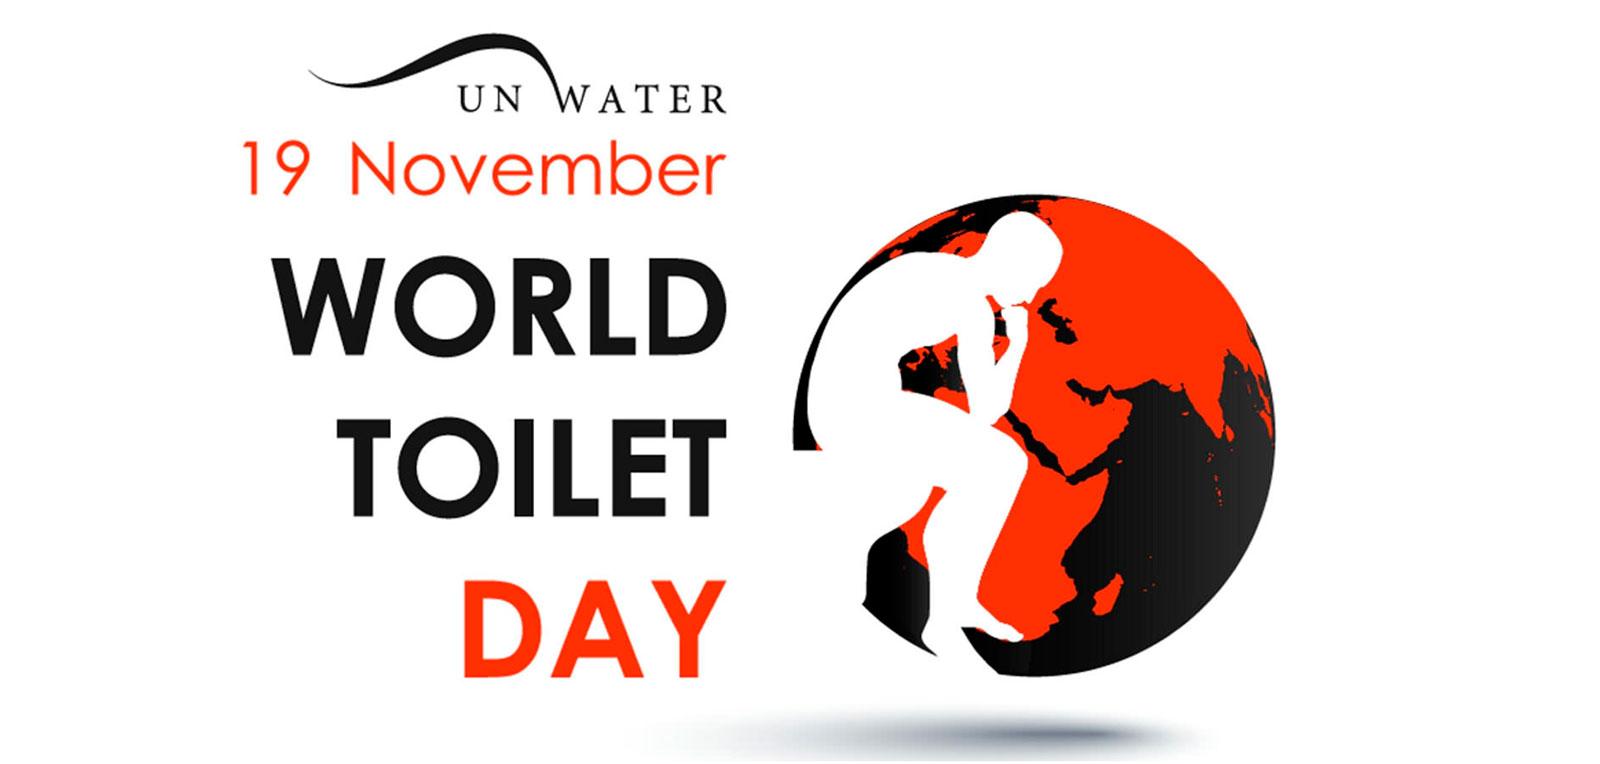 World Toilet Day, to save lives